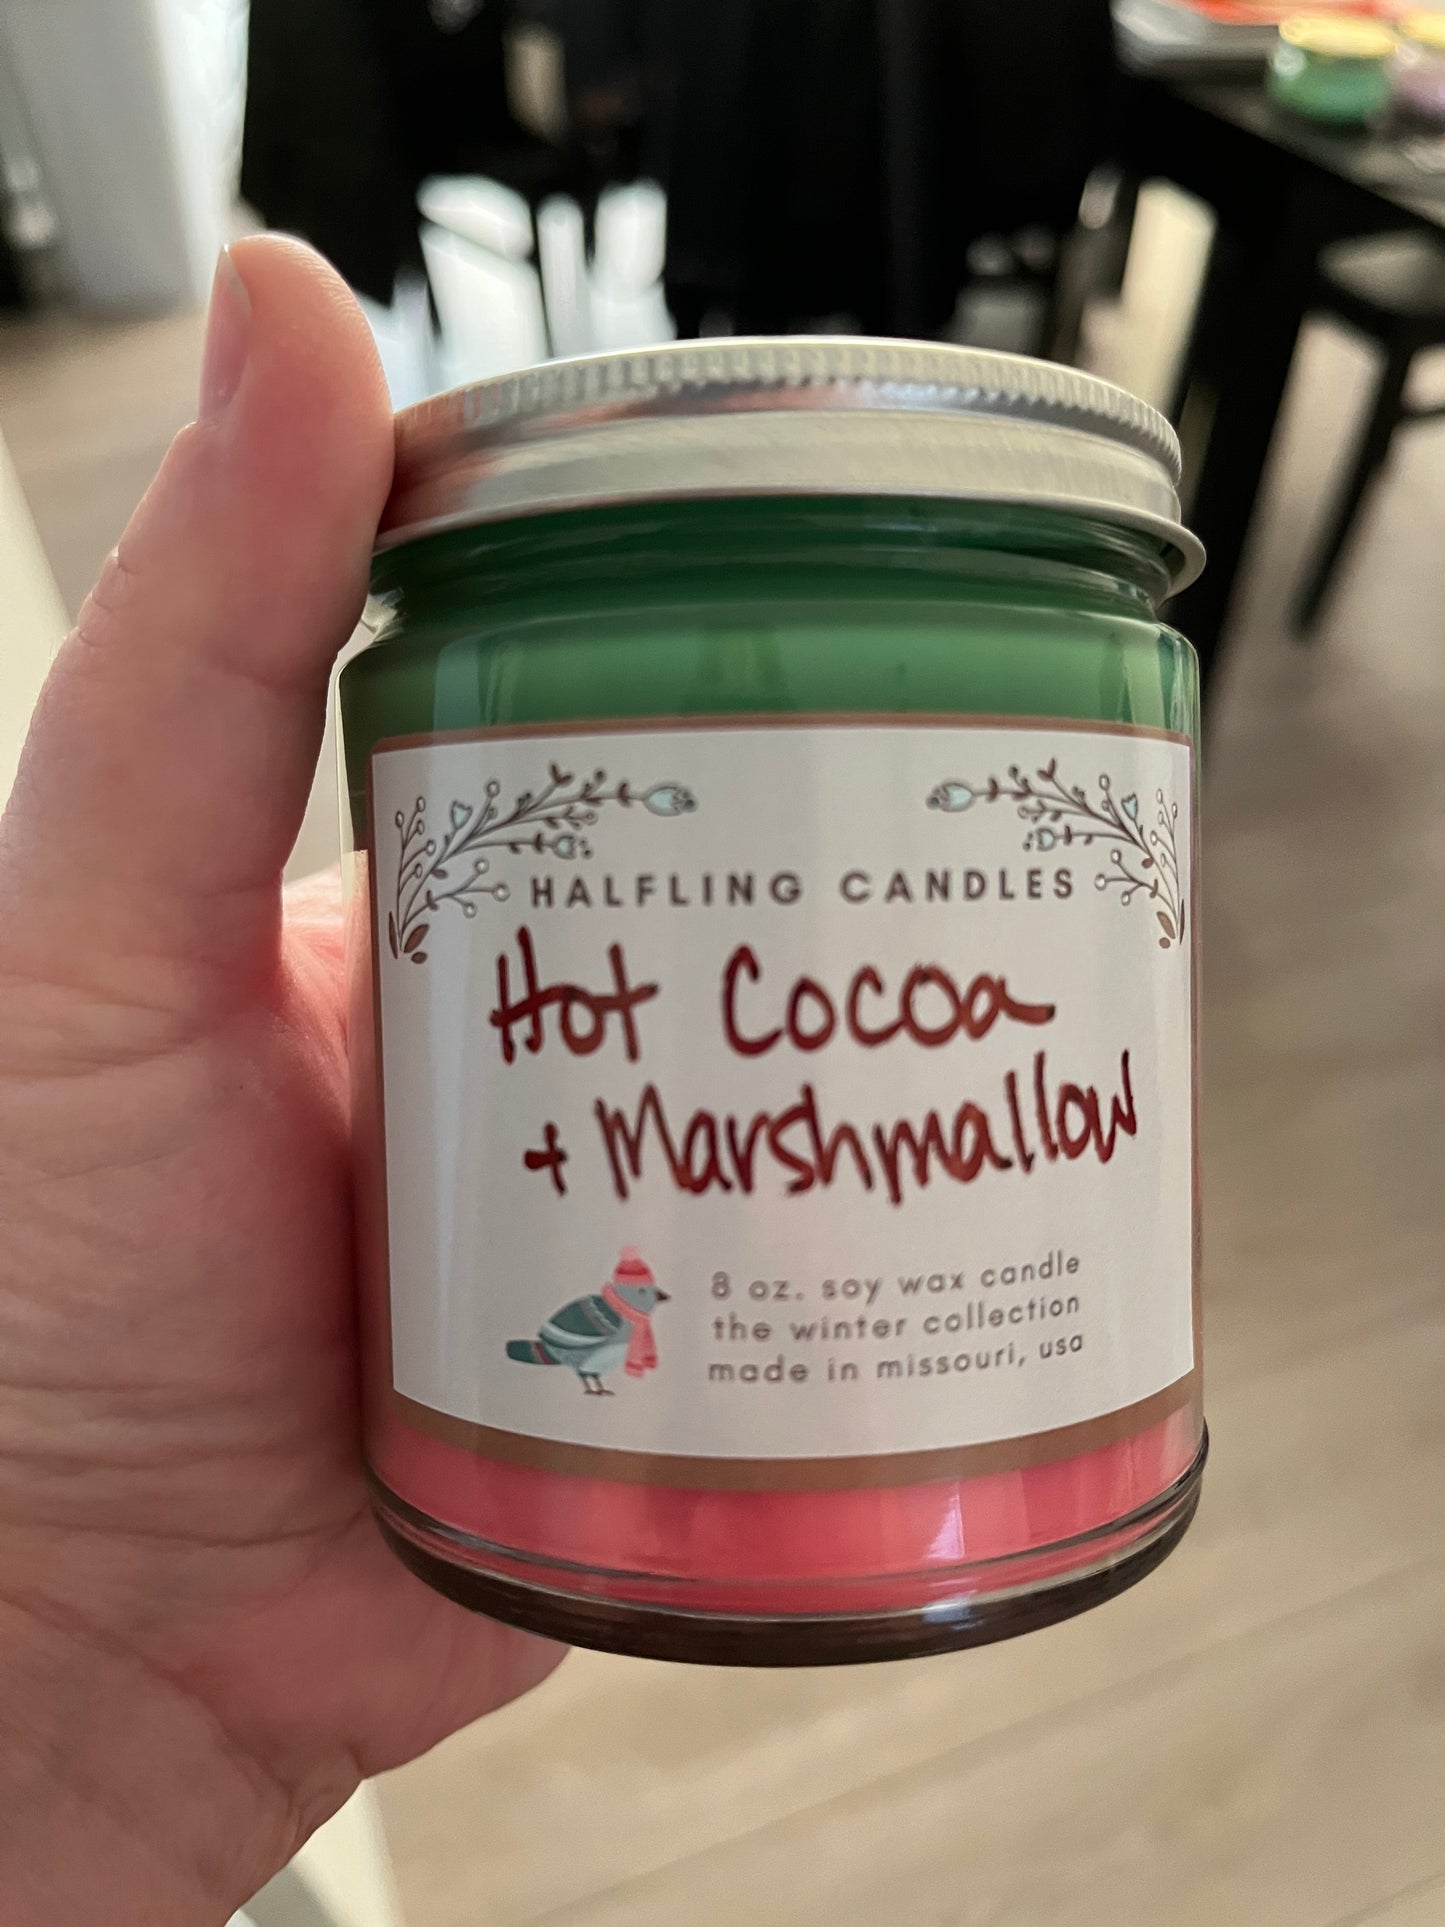 Hot Cocoa with Toasted Marshmallow - Soy Wax Candle